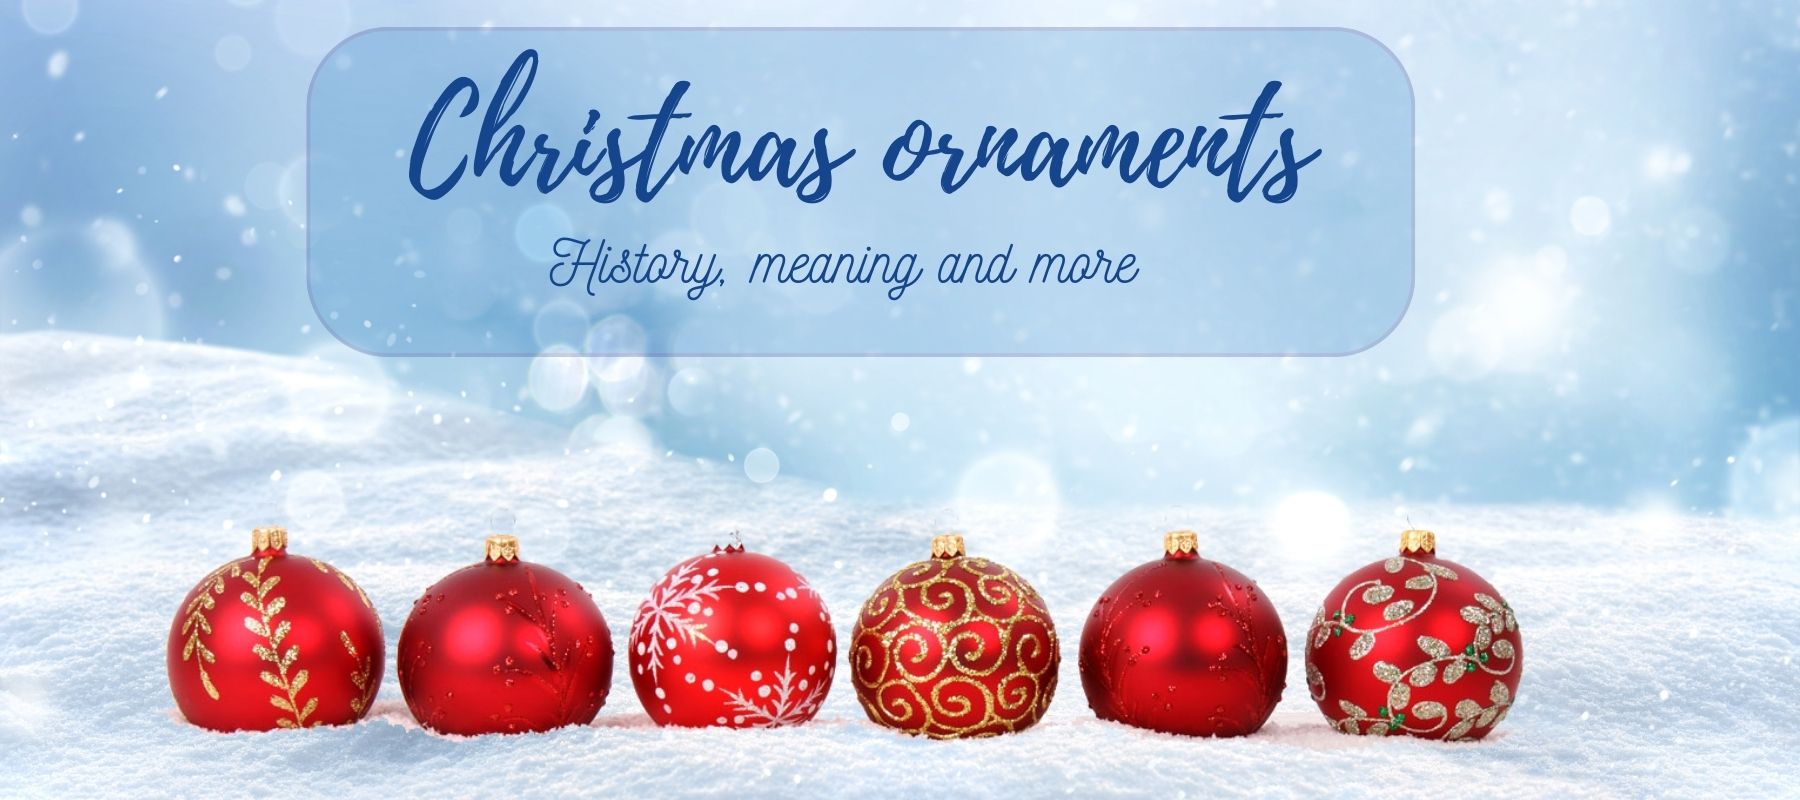 Christmas tree ornaments - Completed guide: History, meaning & more